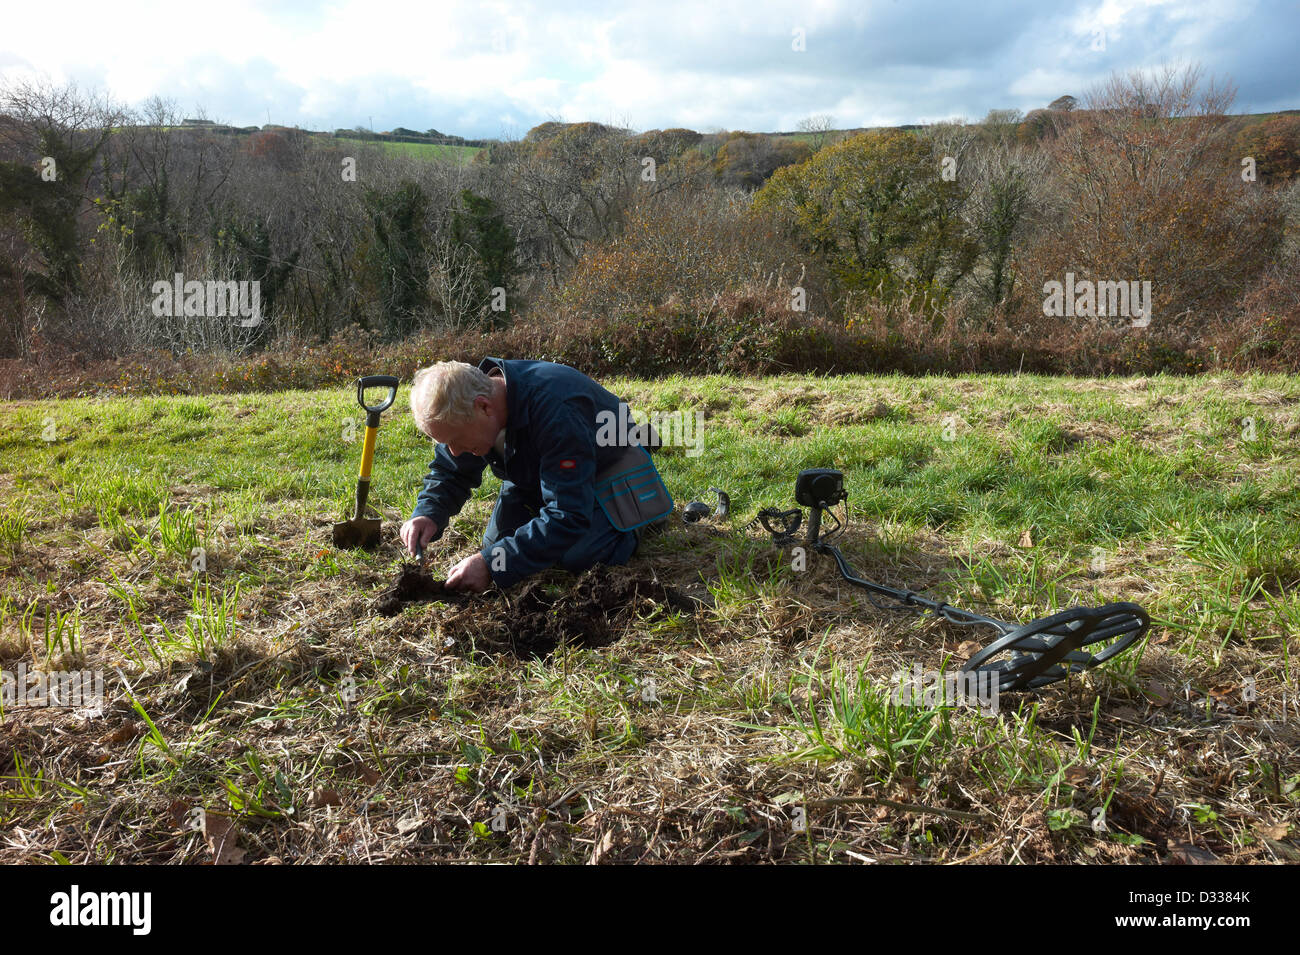 Man using a metal detector finds an object in field near Luxulyan Cornwall  Stock Photo